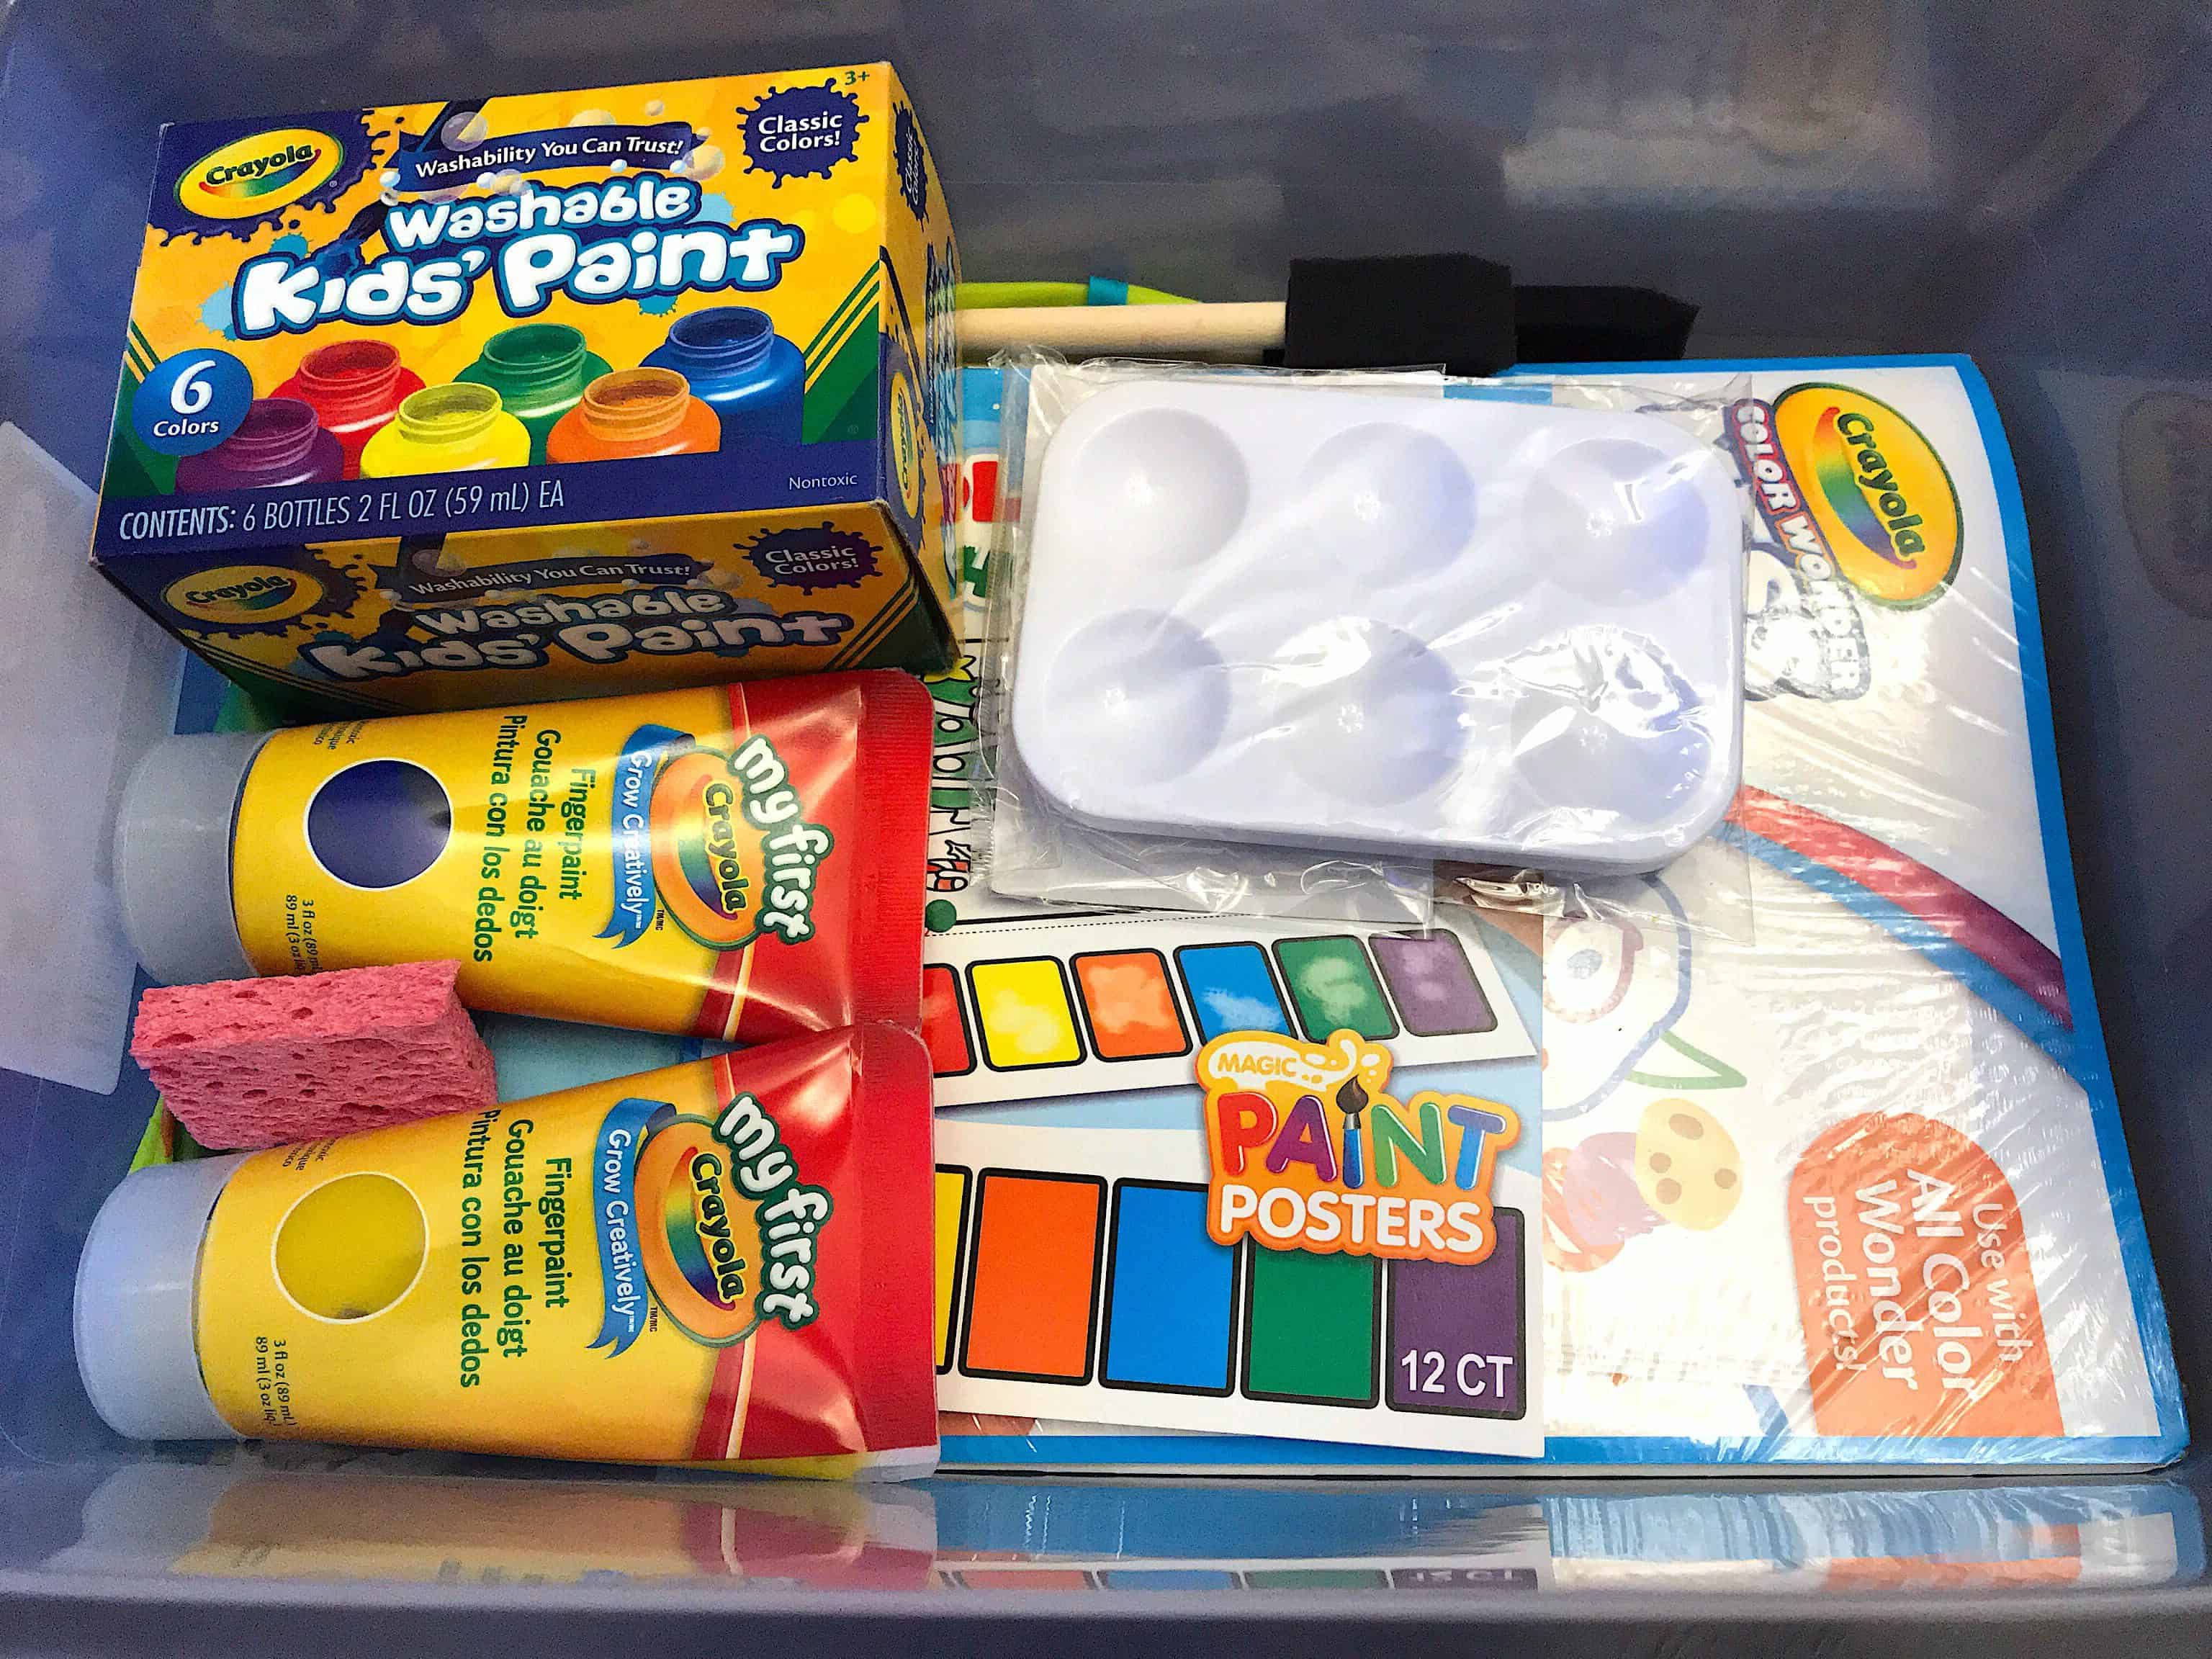 Cheap busy bag ideas for 2 year old toddlers and preschoolers. Head to the dollar store and learn howto make simple educational boxes for boys and girls. #busybags #preschoolers #toddleractivities #toddleractivity #funactivities